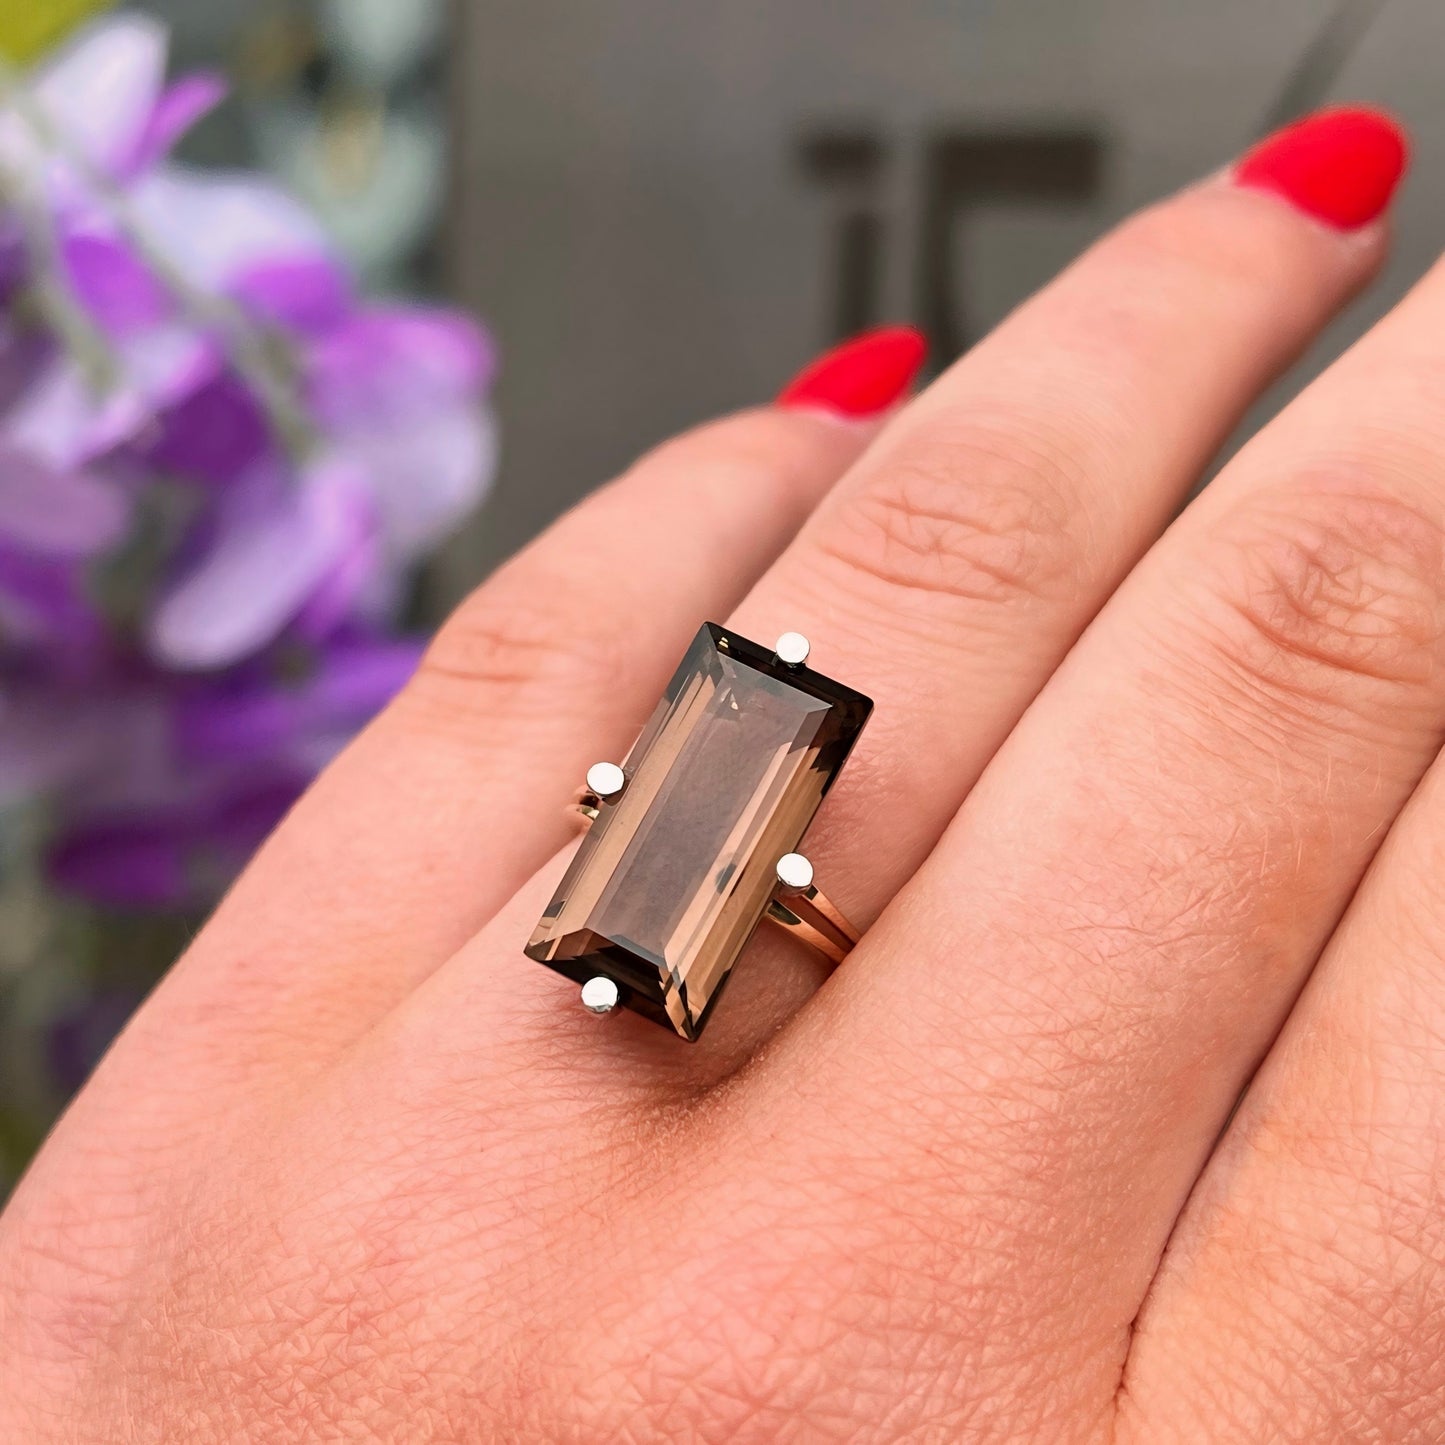 Vintage 9ct Yellow Gold Smoky Topaz Cocktail Ring - Size J